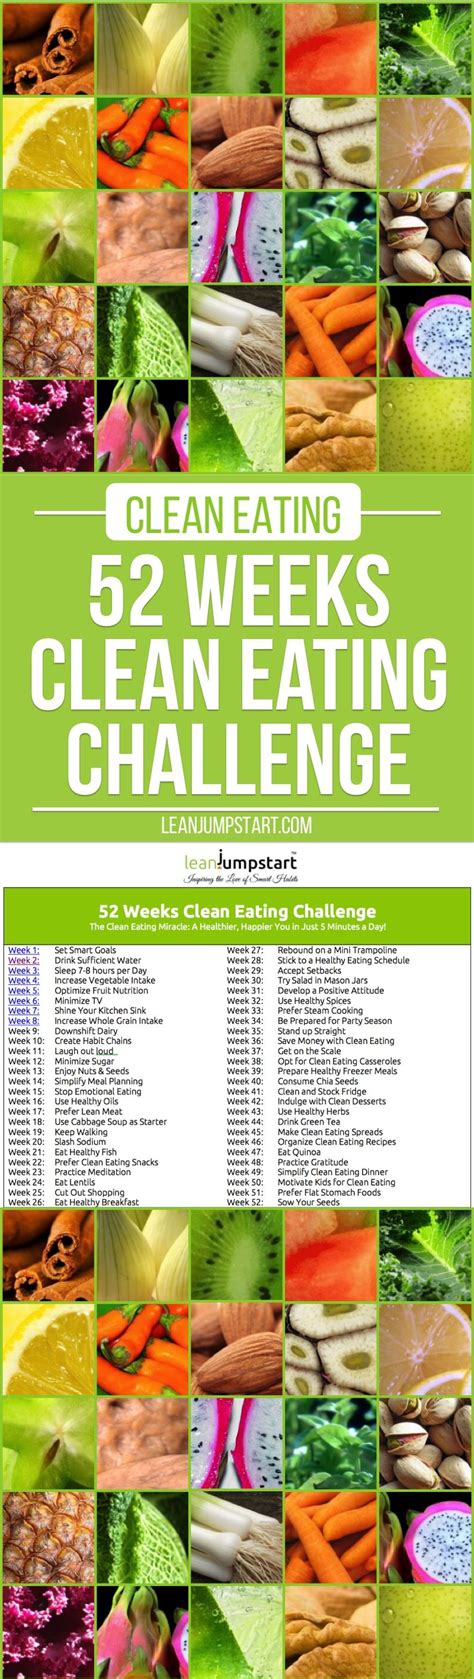 Join The Clean Eating Challenge And Jumpstart Healthy Eating With A